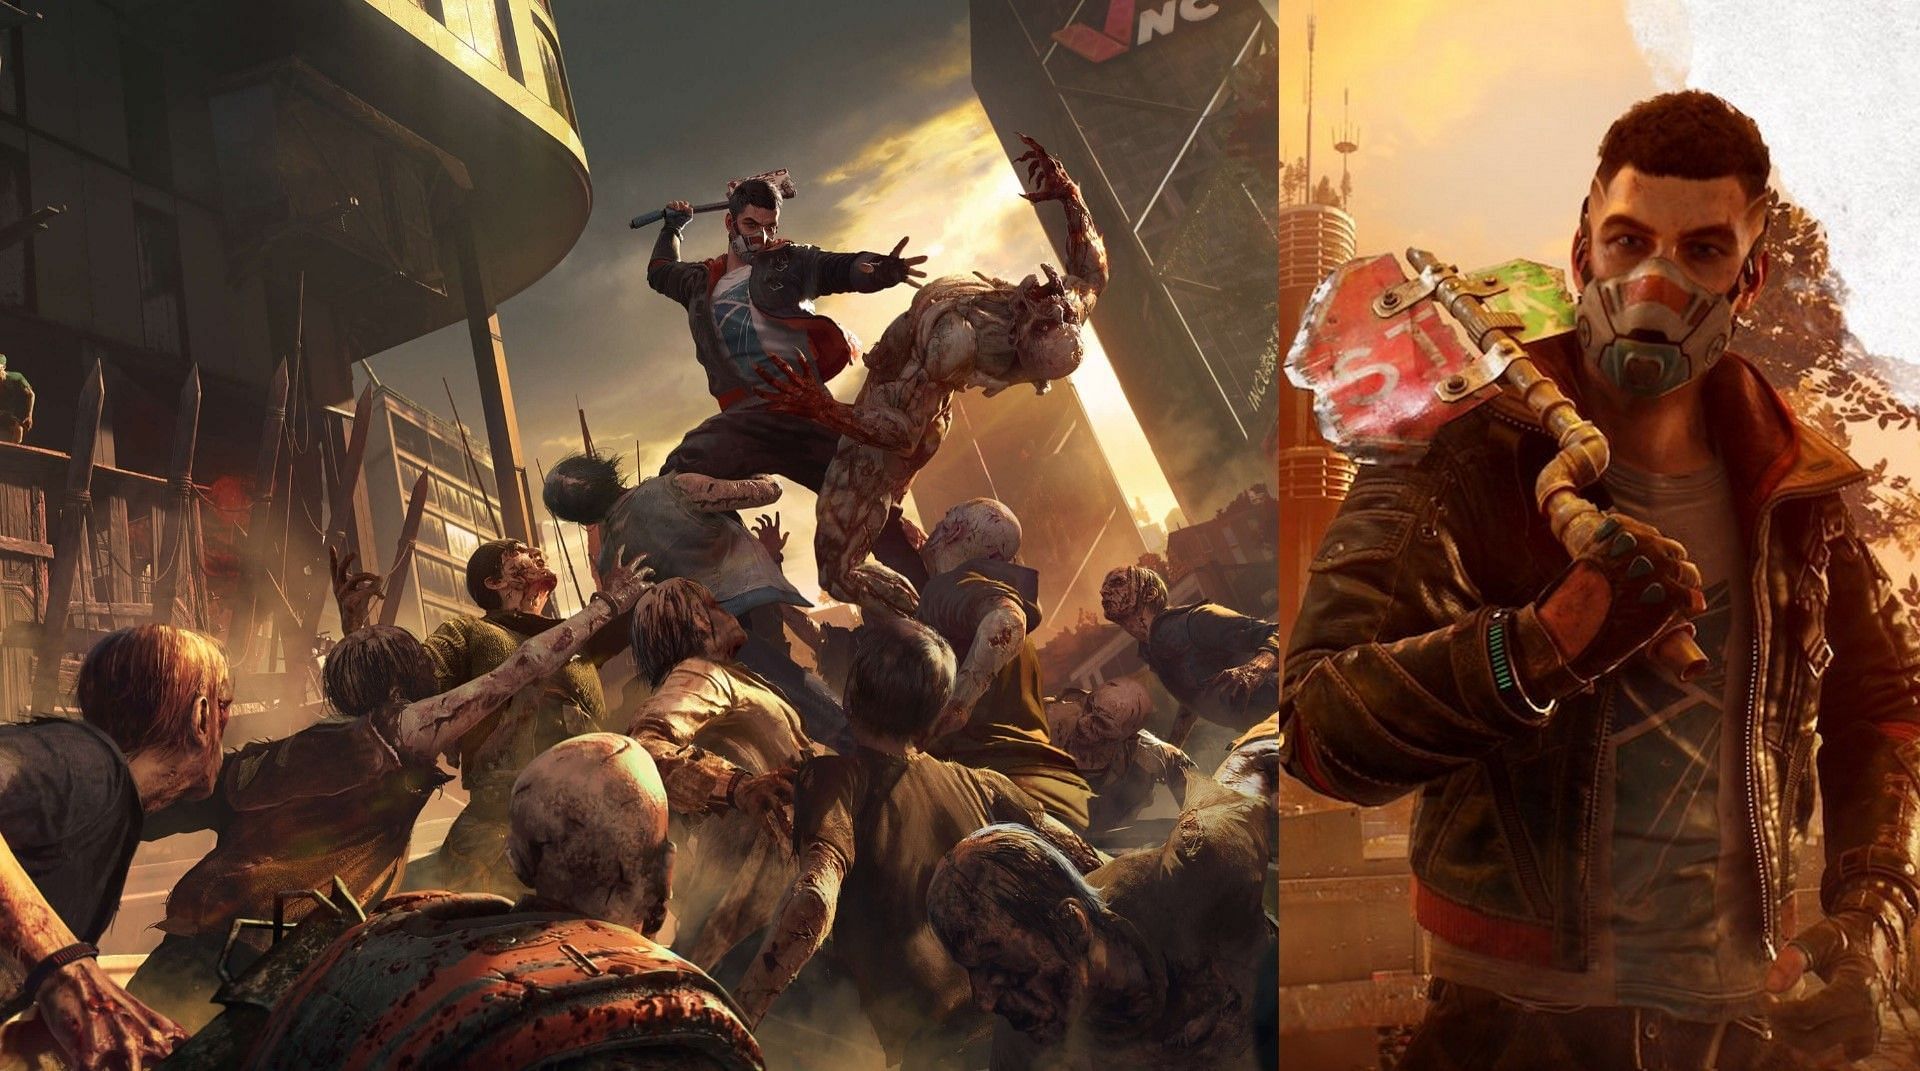 A character fending off zombies on the left and a character wielding a weapon on the right.